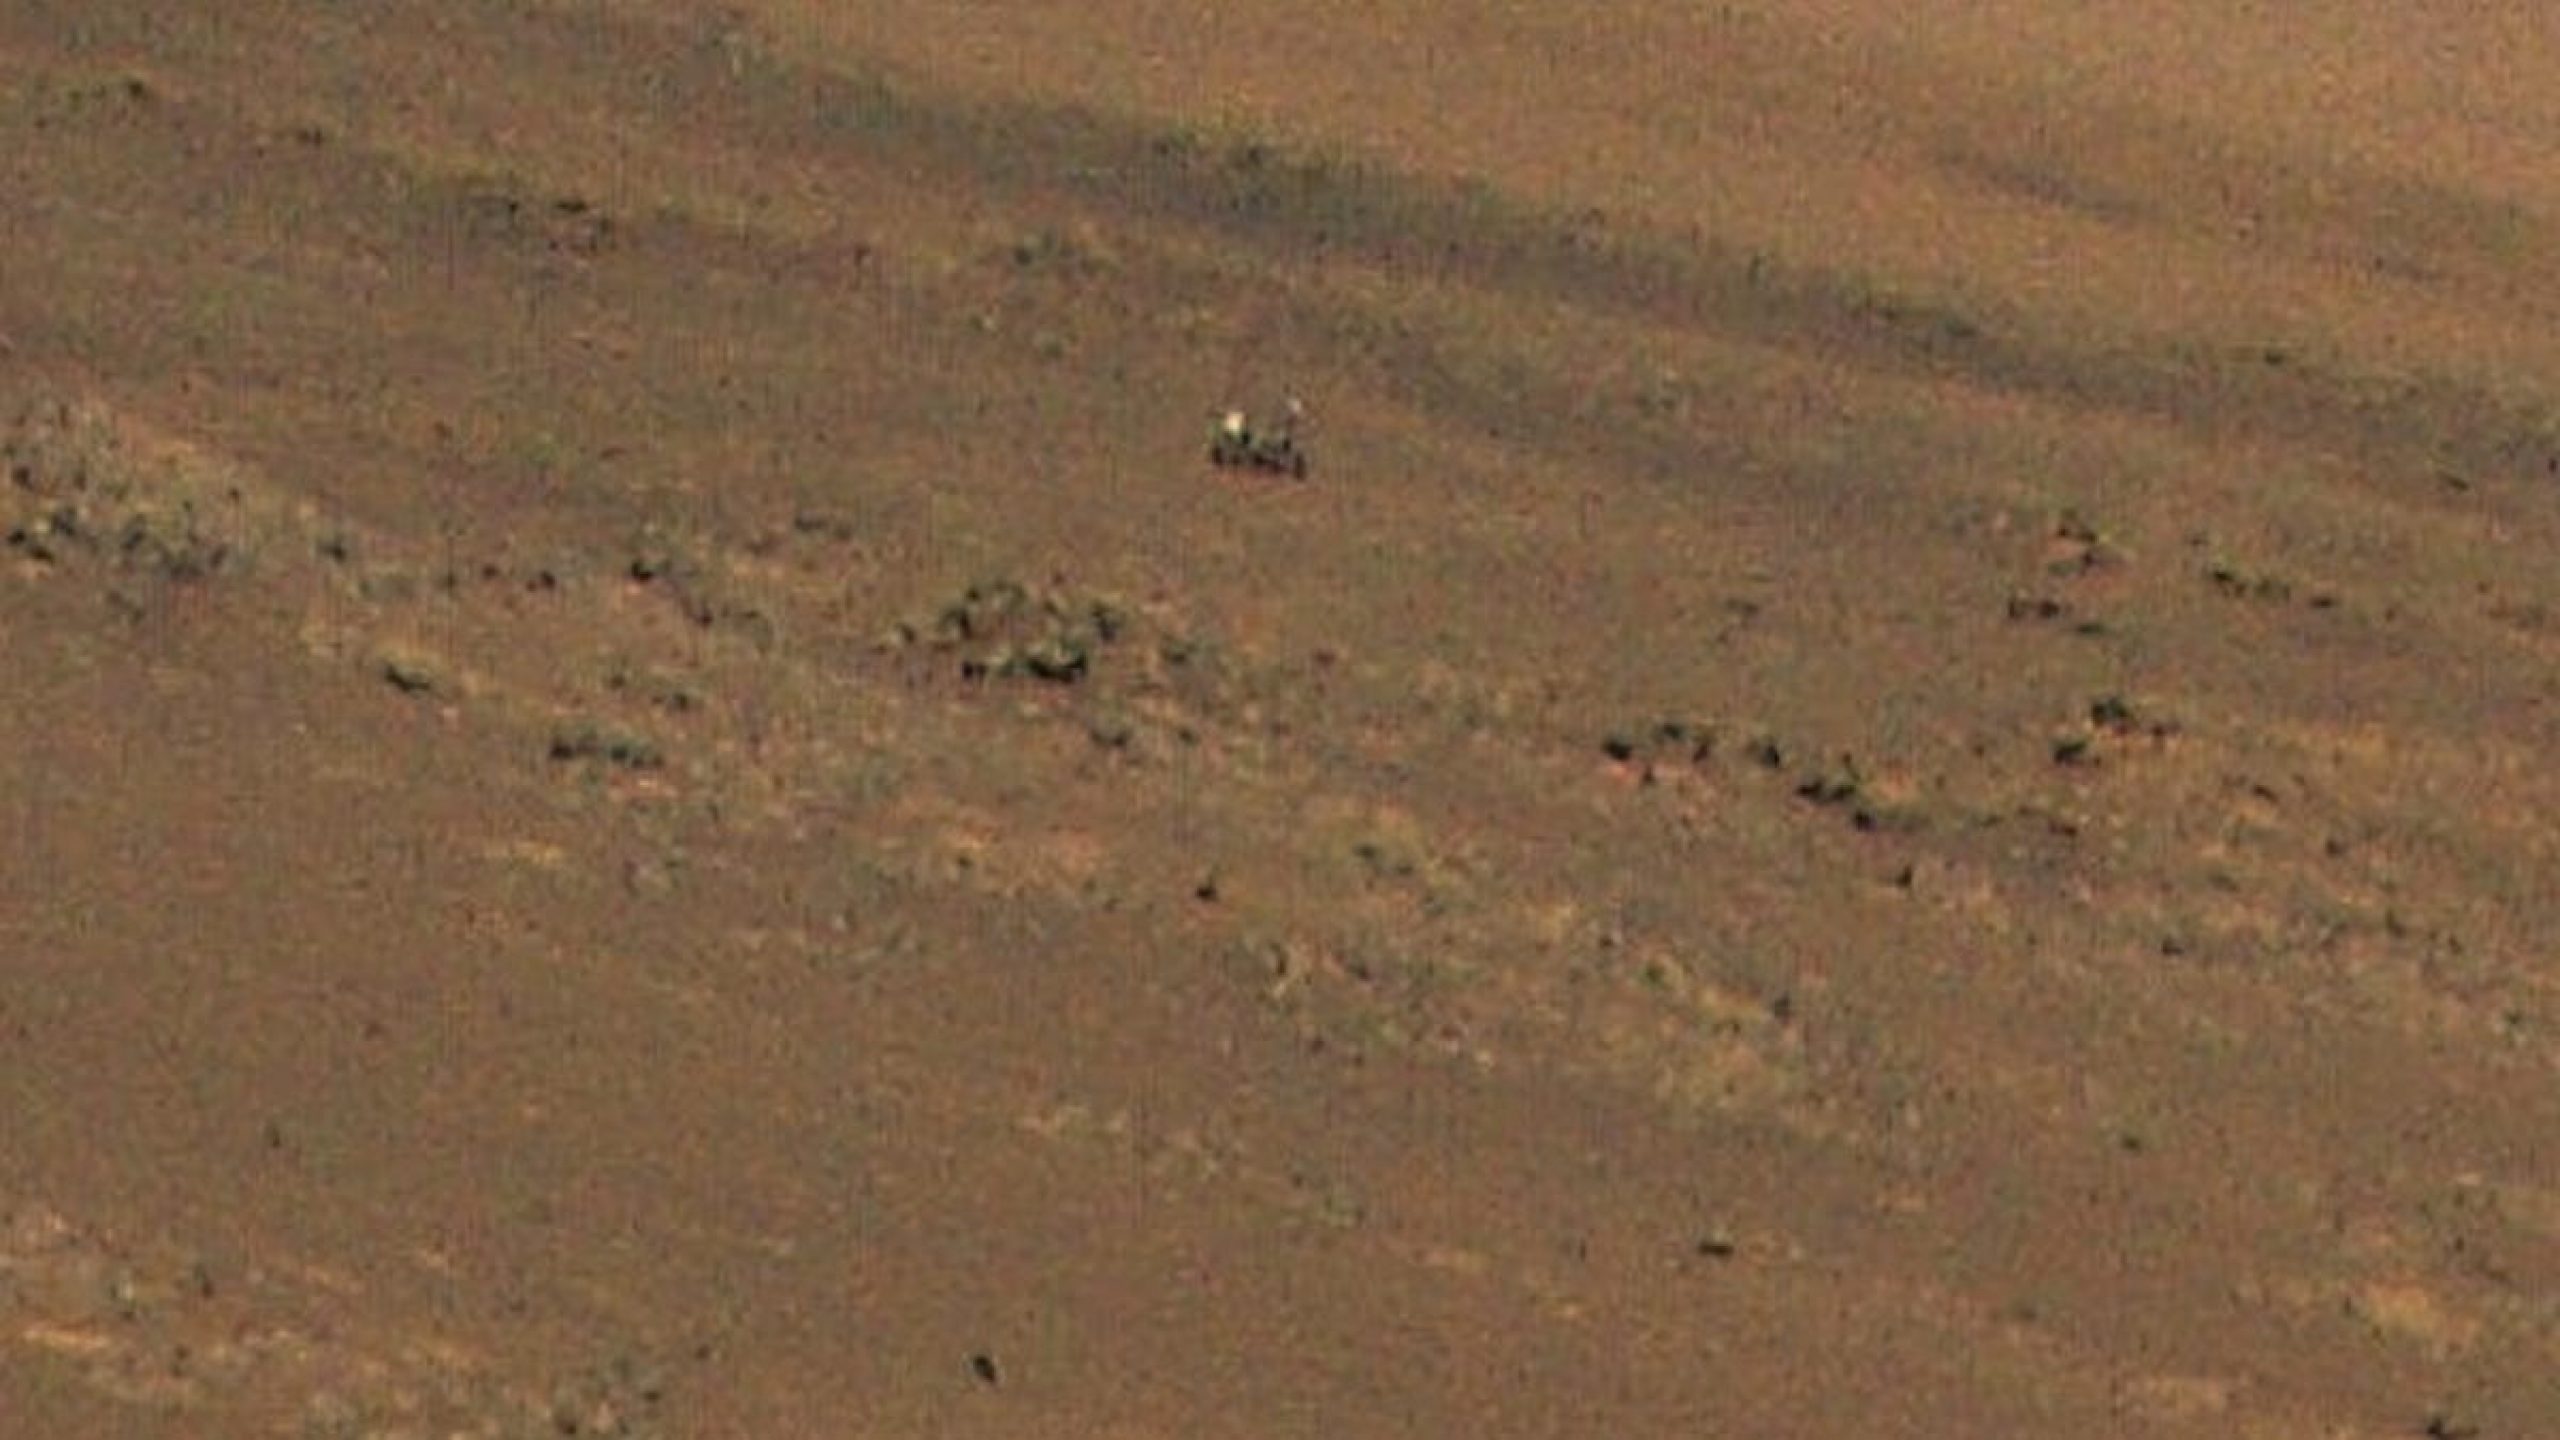 Just Two Robots Hanging Out on Mars